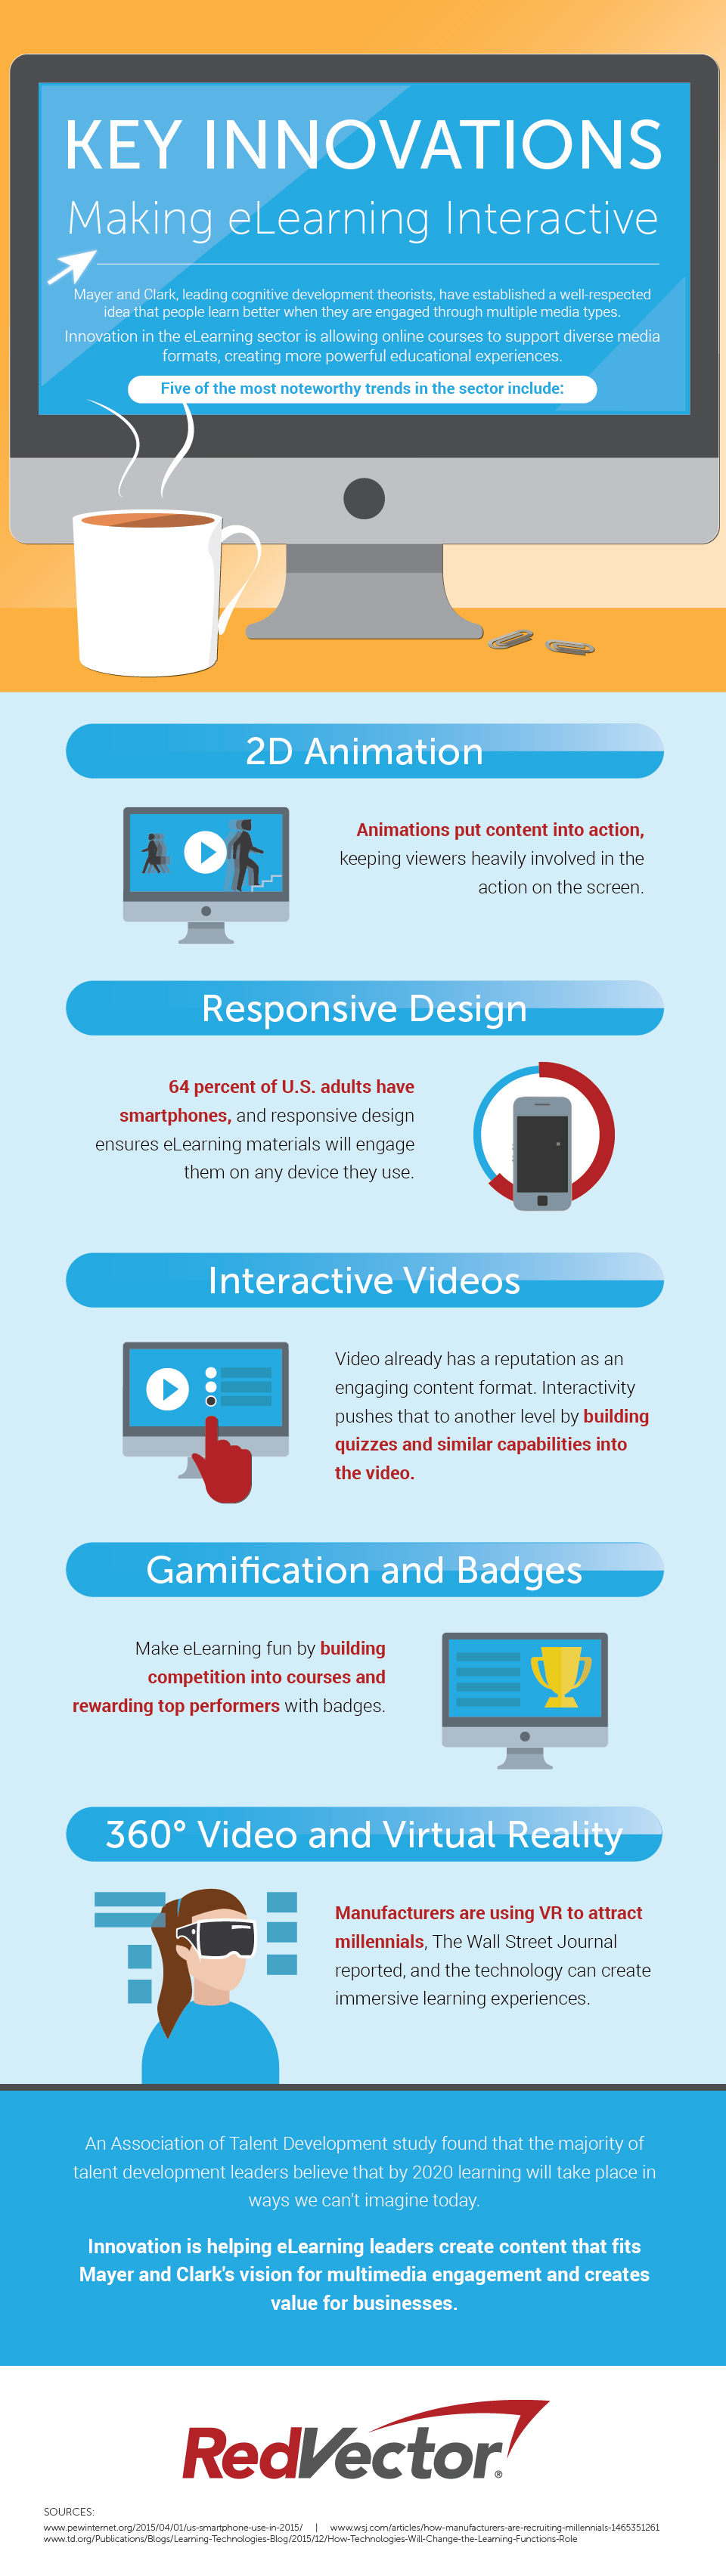 RedVector’s eGuide about making eLearning more interactive with gamification.